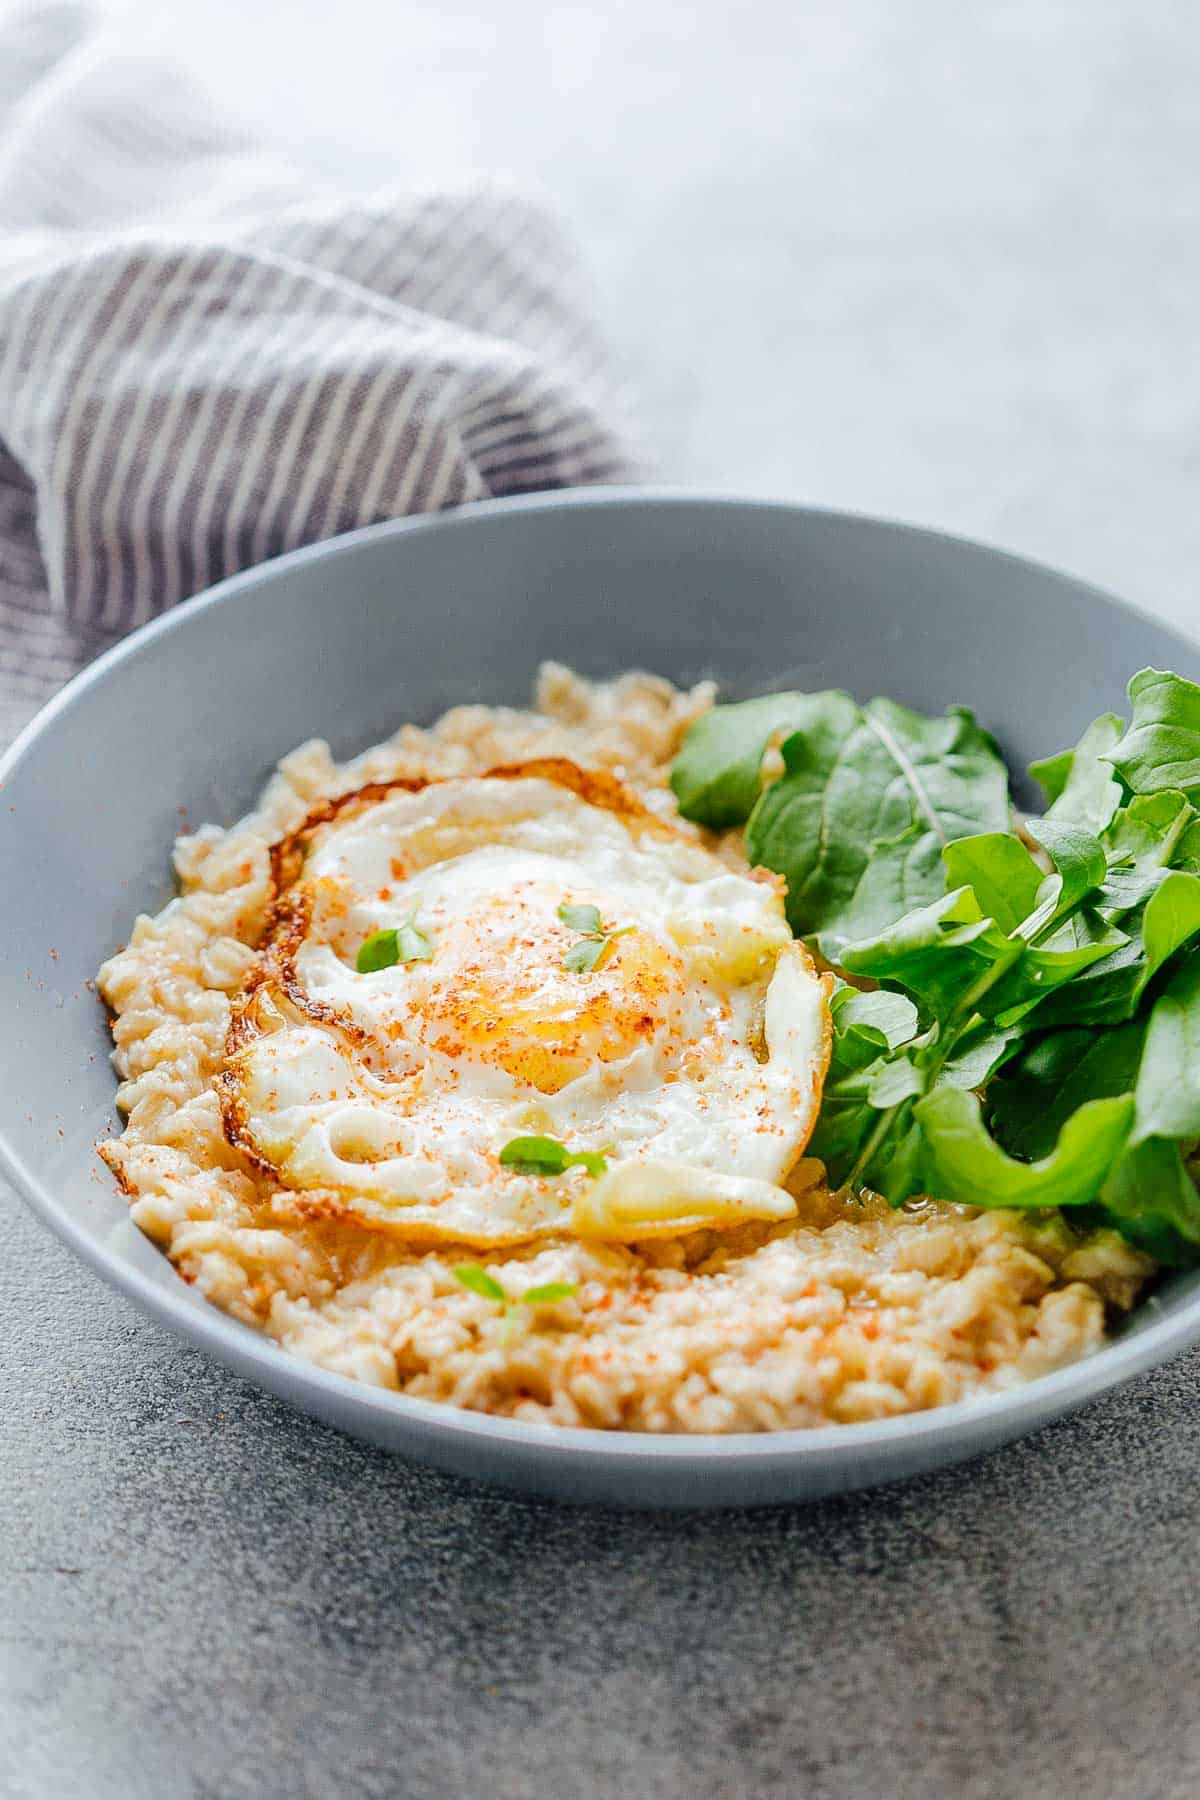 Savory Garlic Oats with Masala Fried Egg in a bowl with mixed lettuce greens